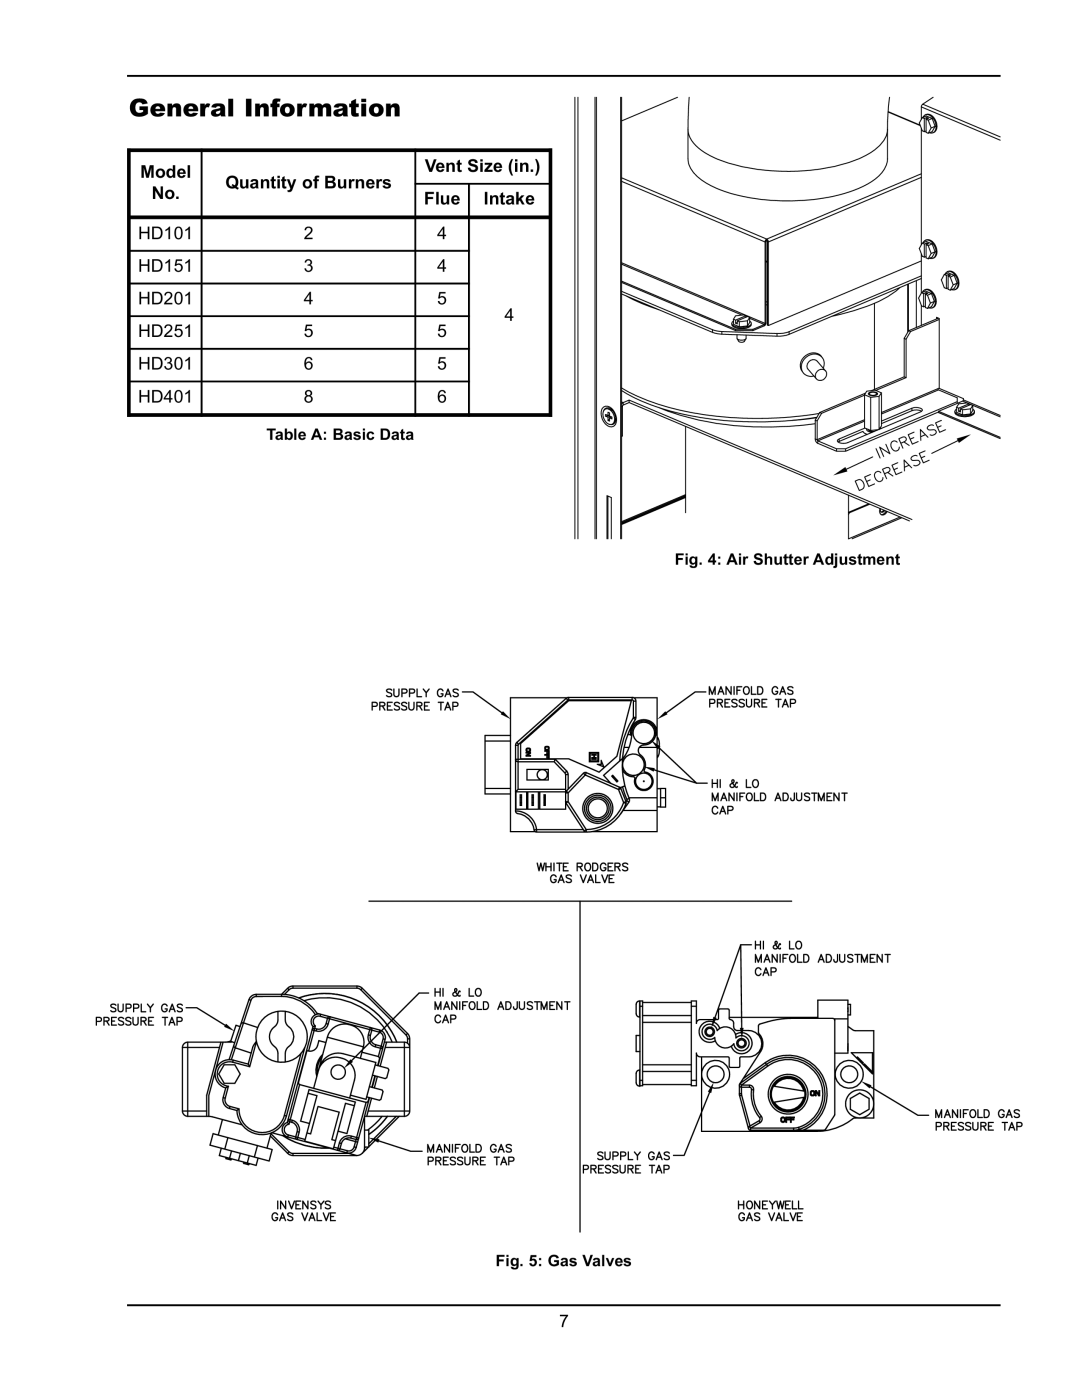 Raypak HD101, HD401 operating instructions General Information, Quantity of Burners, Vent Size in, Flue 